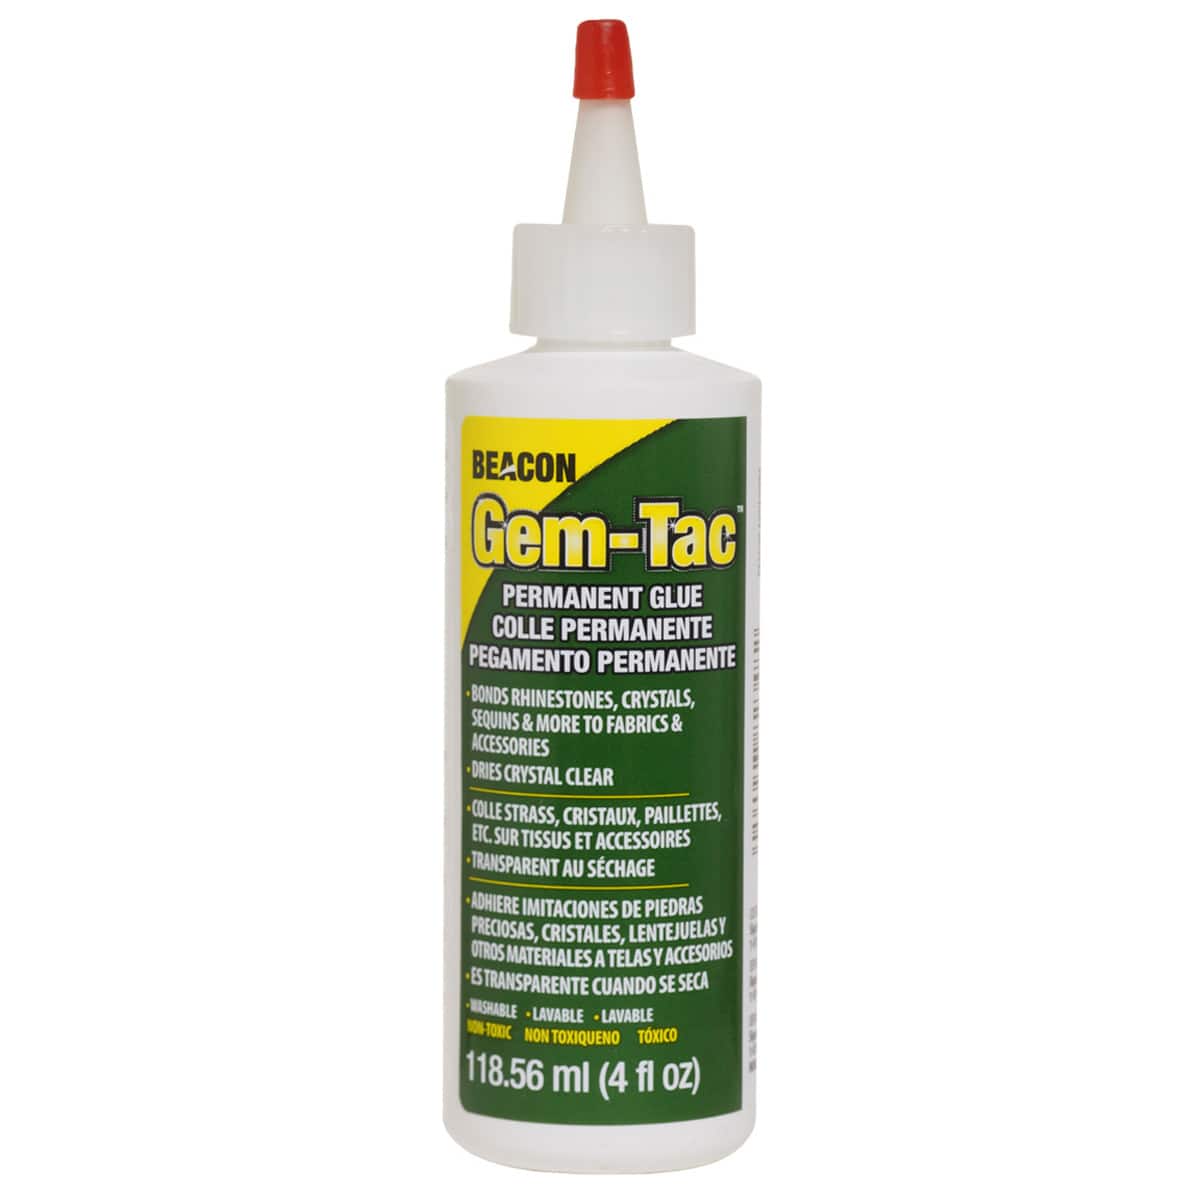 Beacon's Gem-tac Glue for Crafts Projects Art Work Jewelry Making